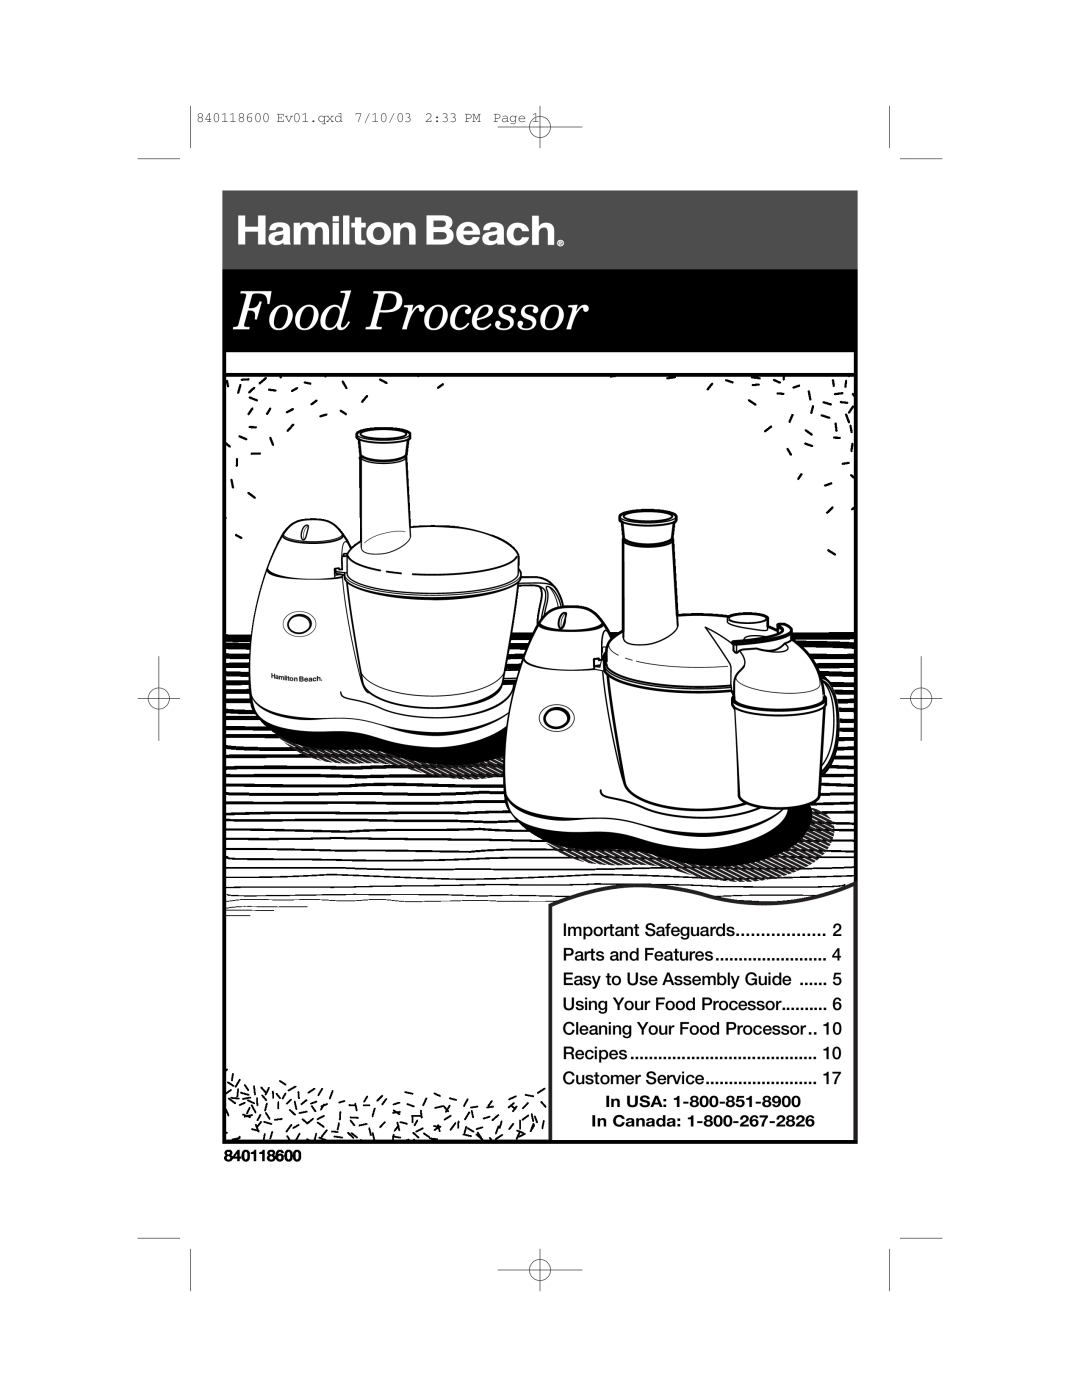 Hamilton Beach 70550RC manual Important Safeguards, Cleaning Your Food Processor, In USA, In Canada 